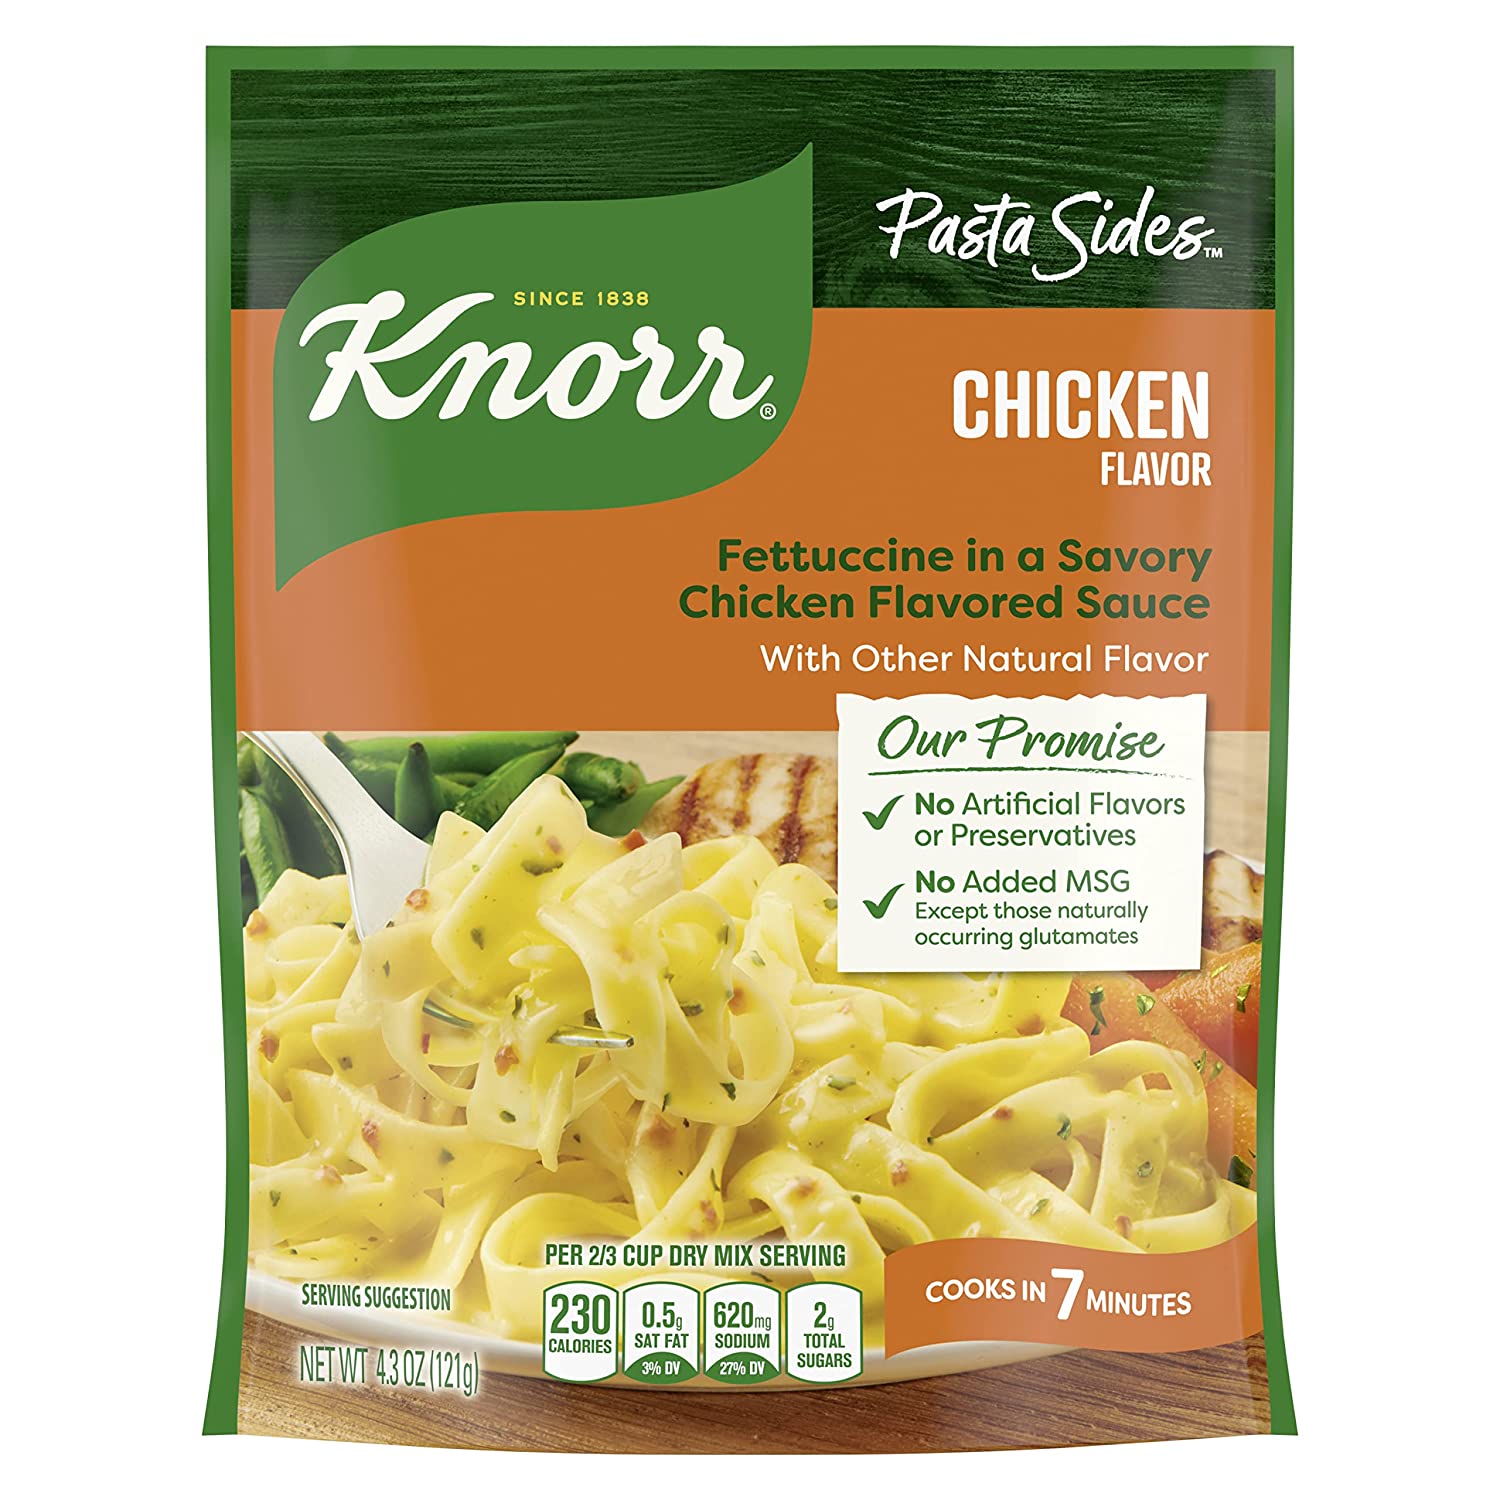 12-Pack 4.3-Oz Knorr Pasta Sides Dish (Chicken Fettuccine) $7.11 w/ S&S + Free Shipping w/ Prime or on orders over $25